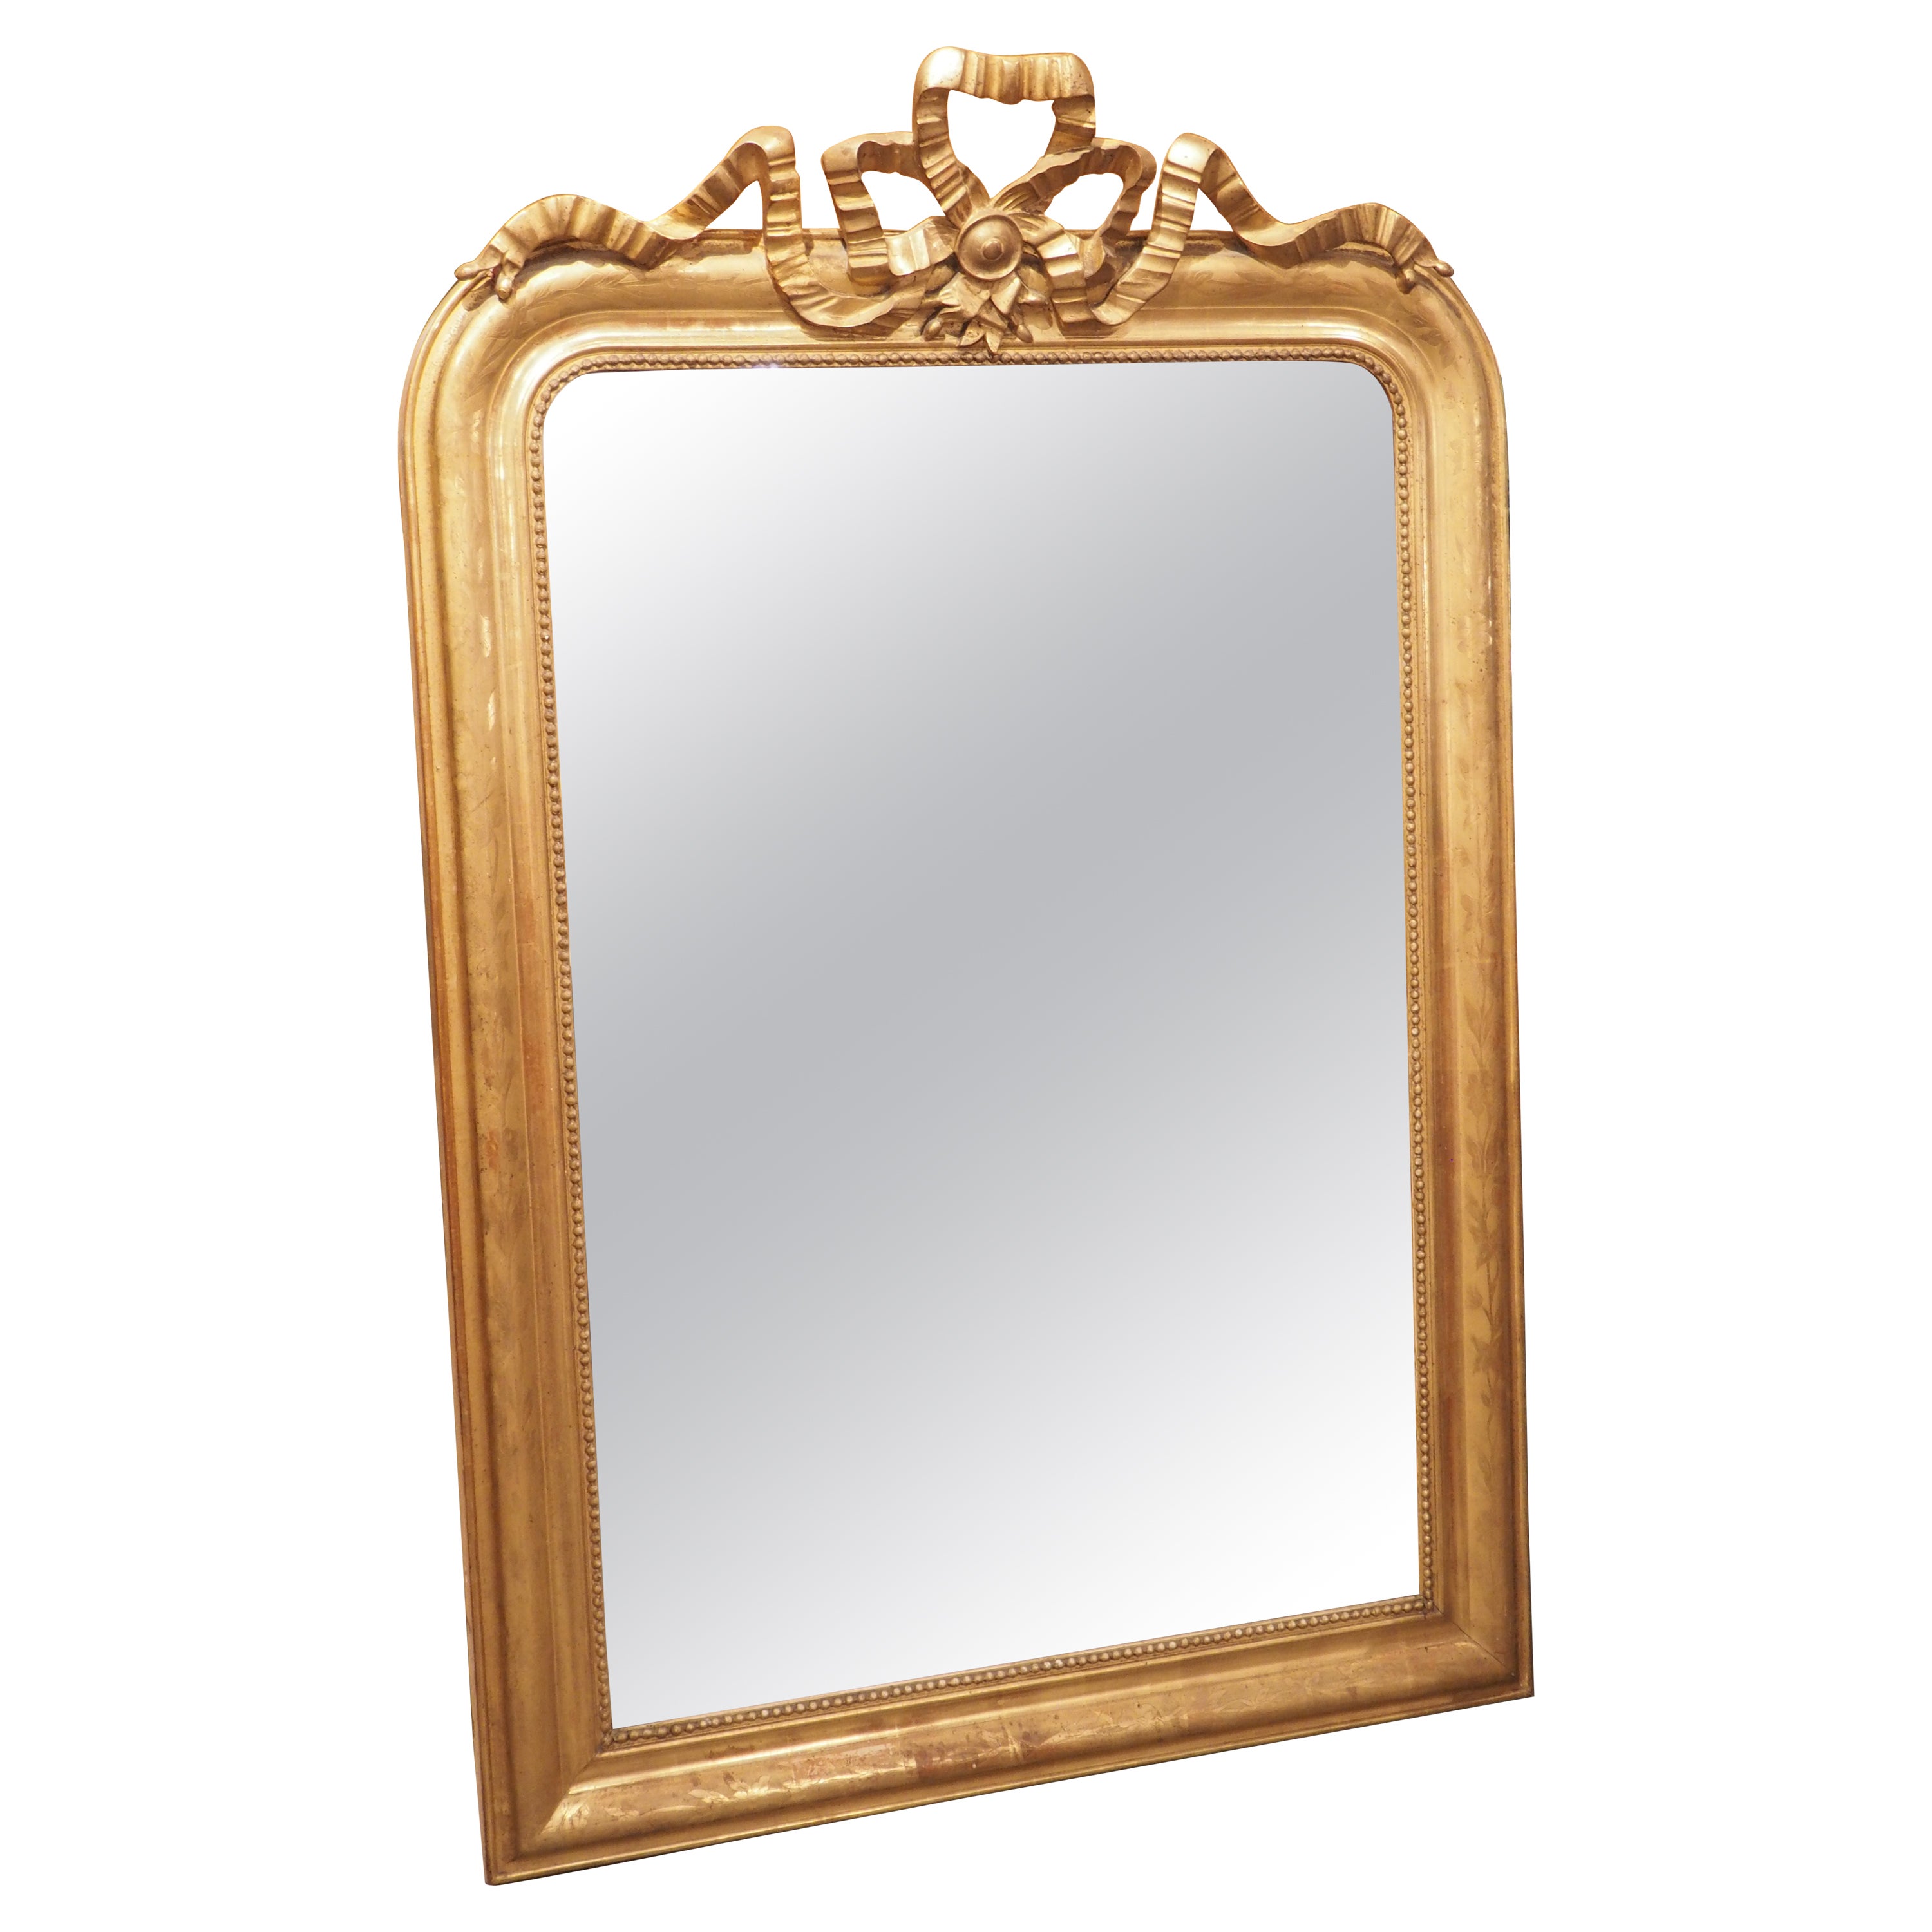 19th C. French Gold Louis Philippe Mirror with Crinkled Bow and Floral Motifs